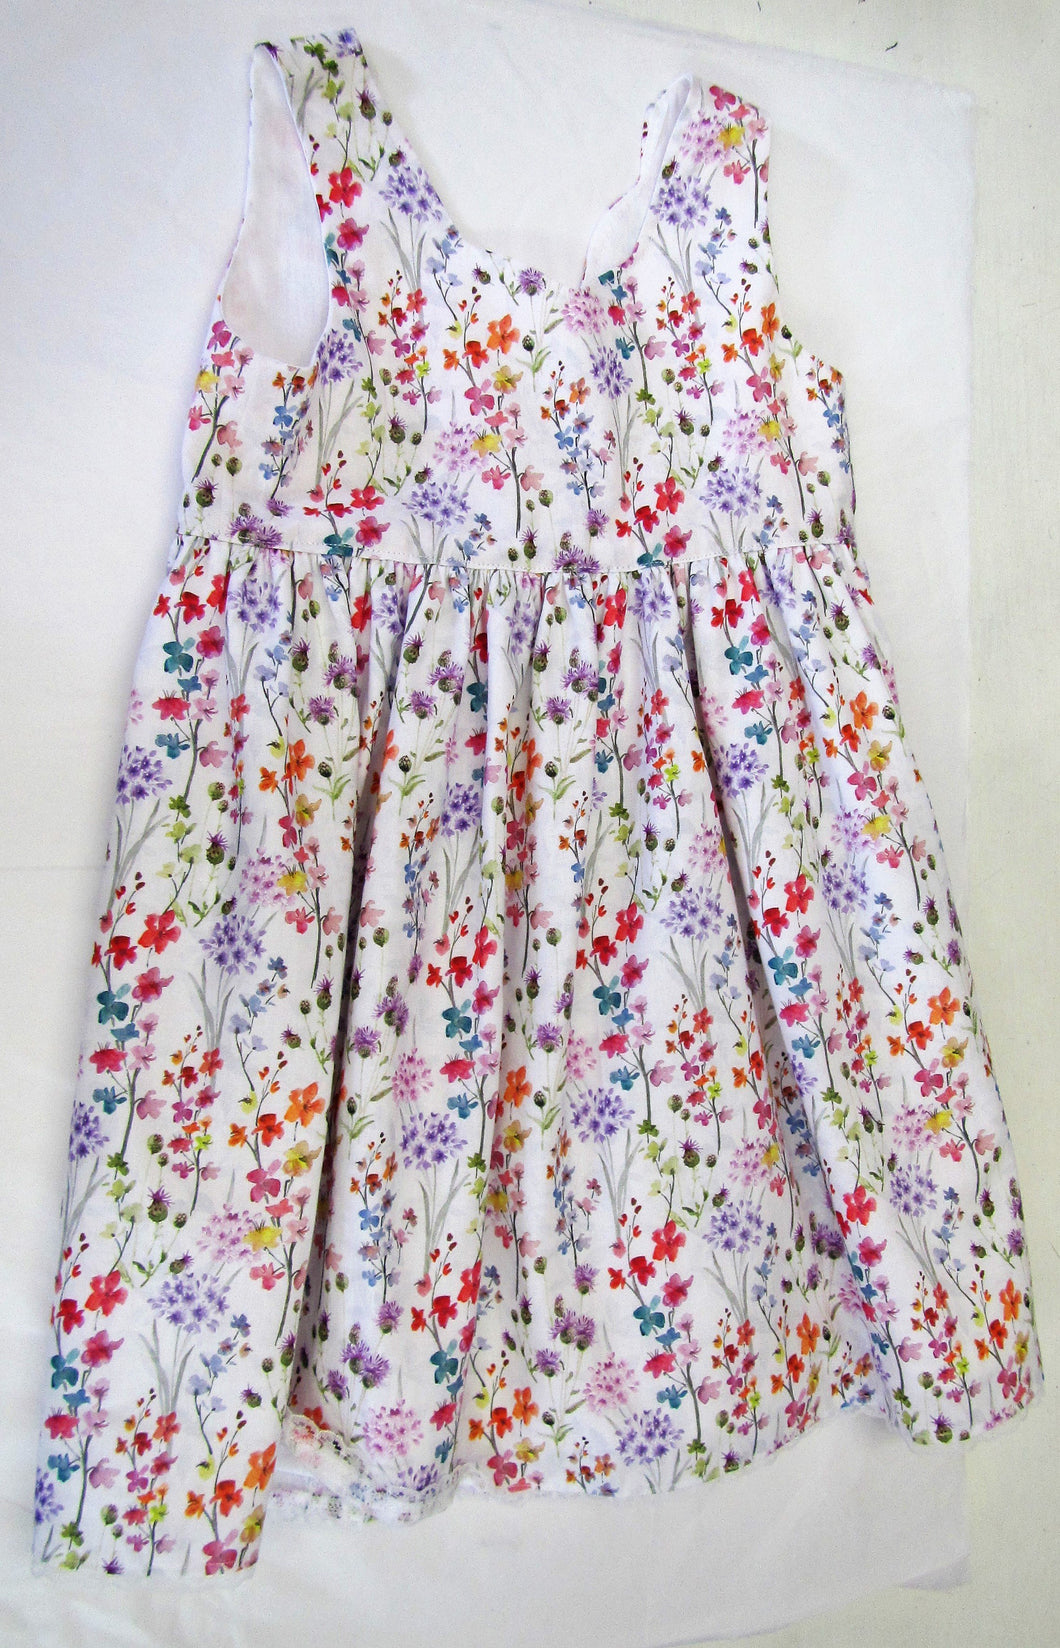 Handcrafted white dress with various coloured flowers and fully lined 4-5 years